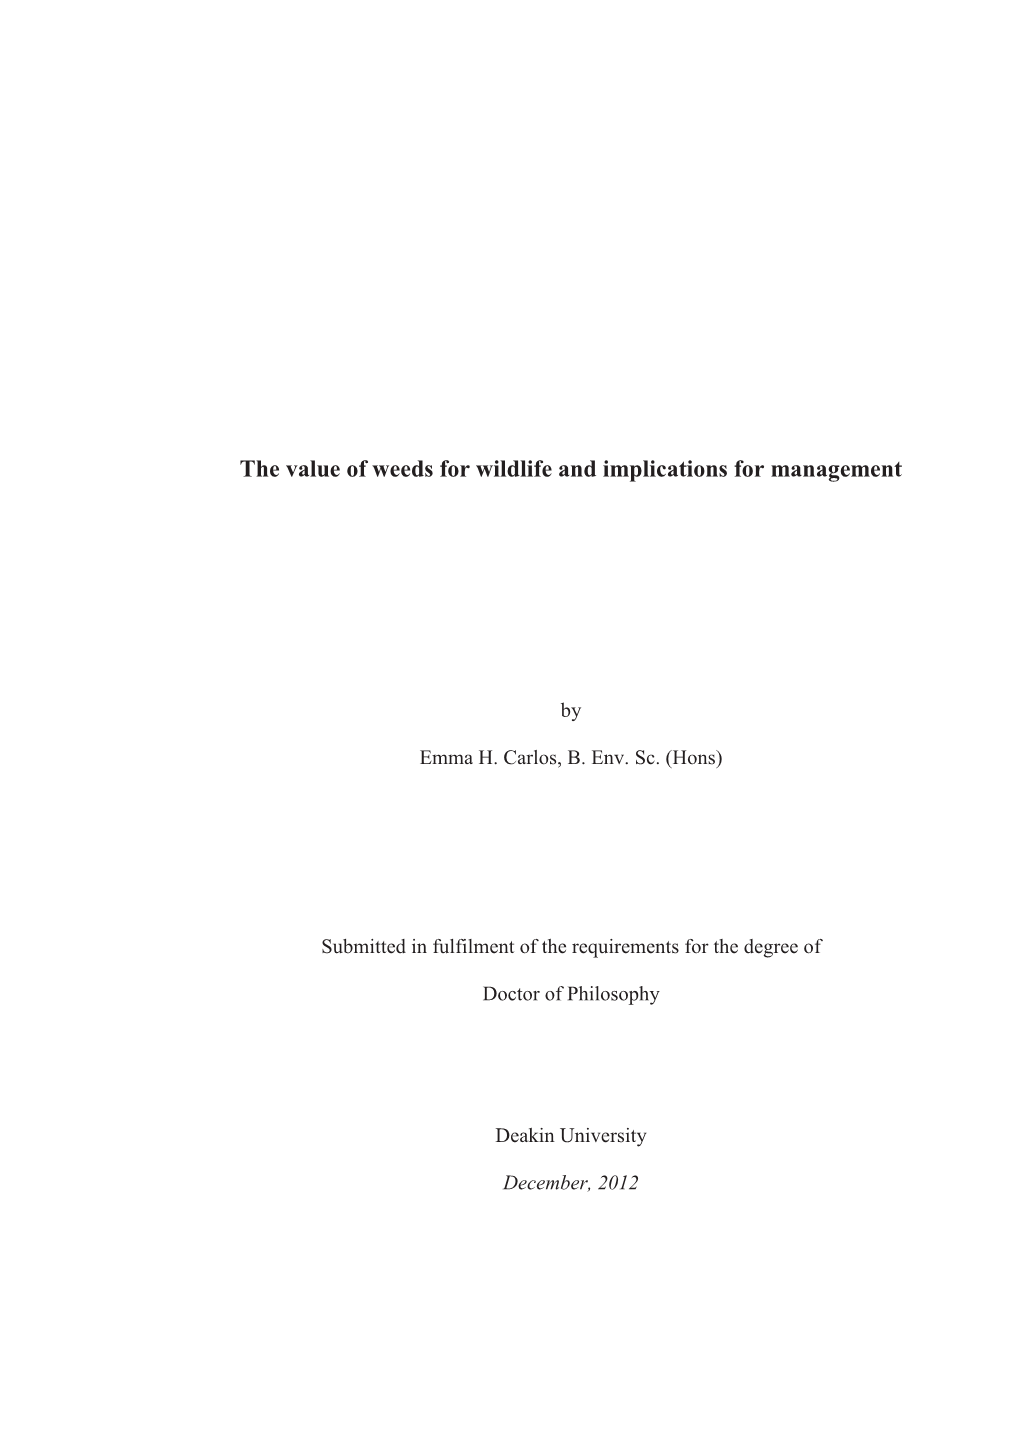 Thesis Title